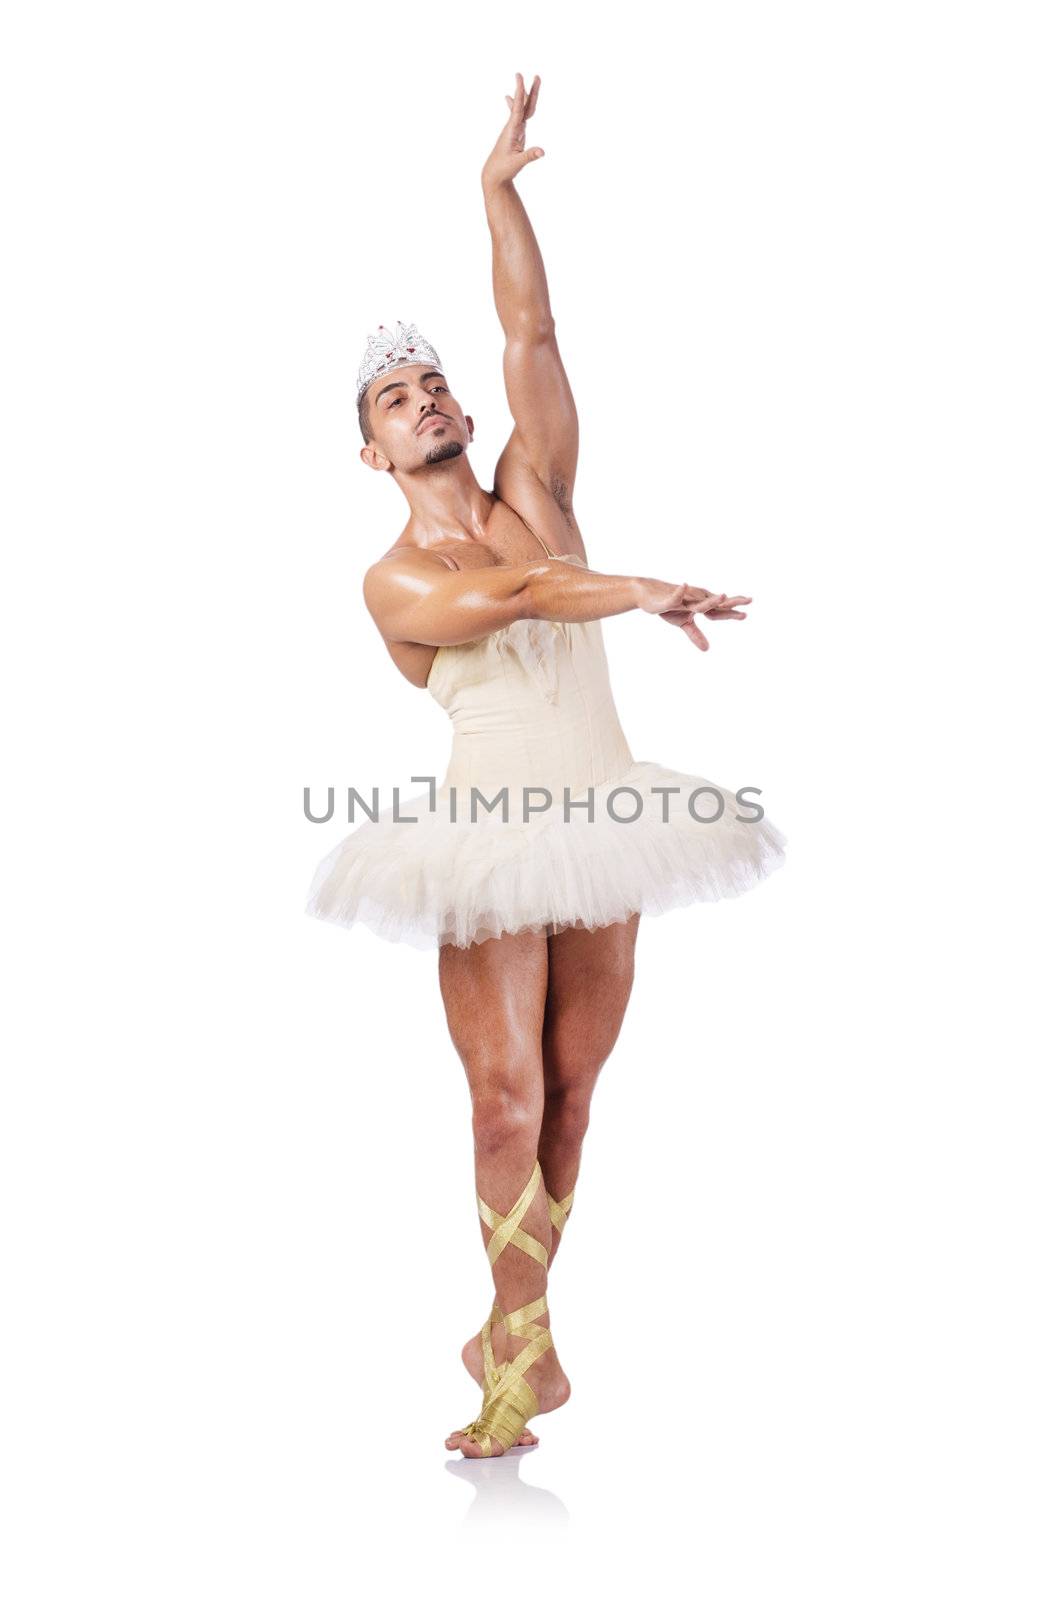 Muscular ballet performer in funny concept by Elnur